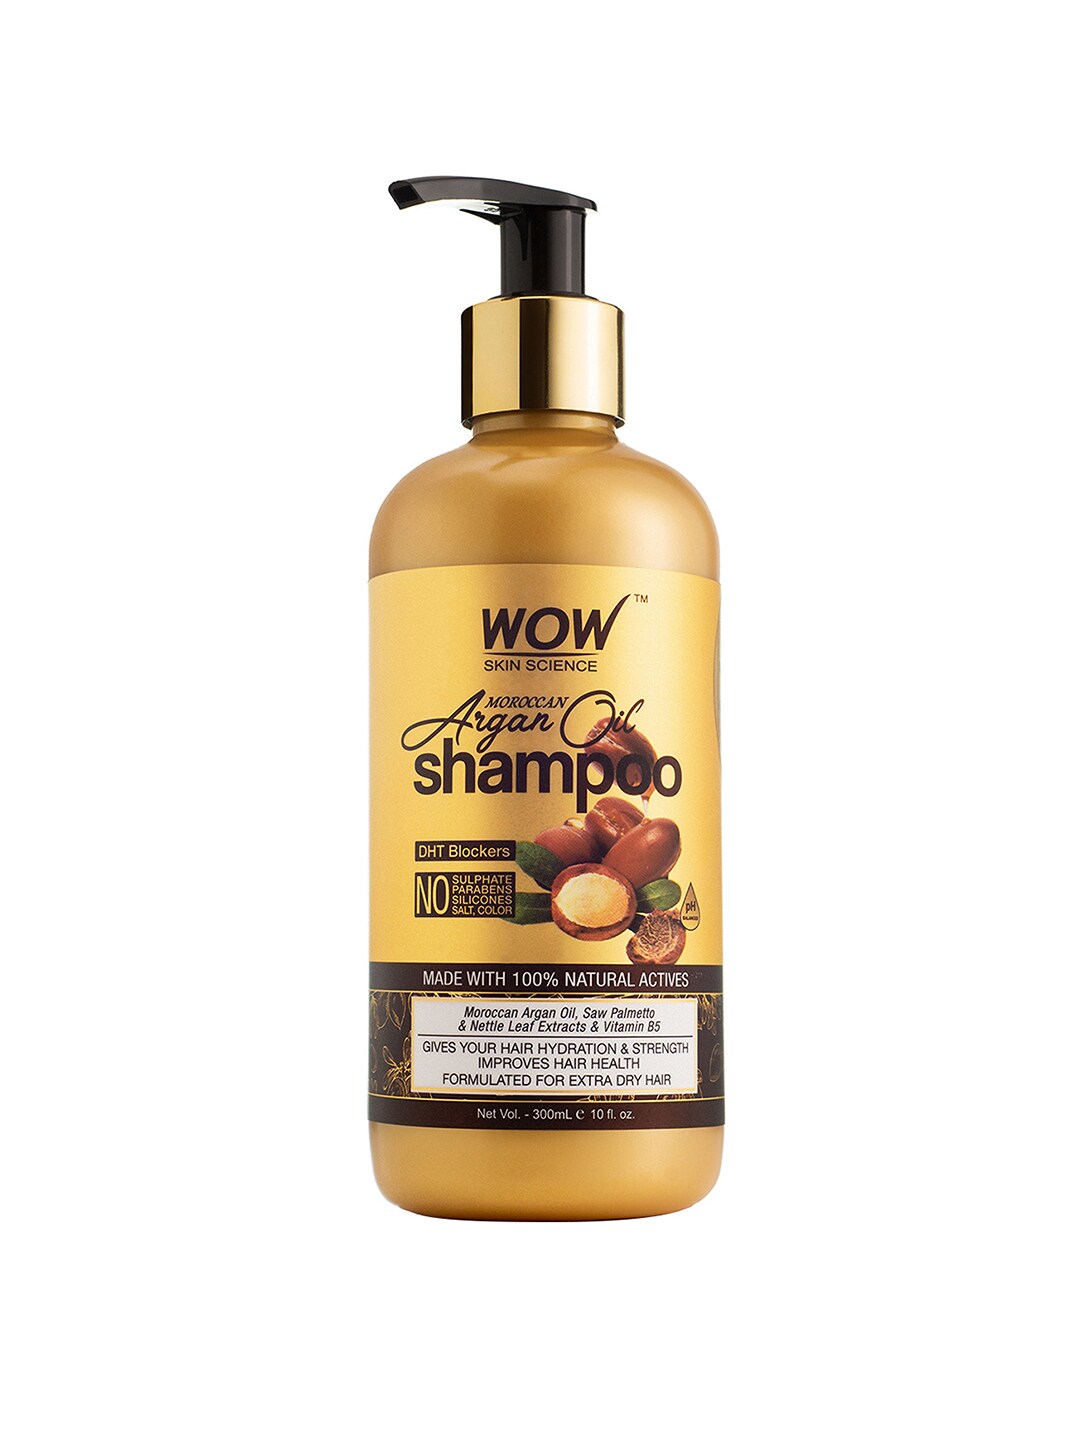 WOW Skin Science Moroccan Argan Oil Shampoo (with DHT Blocker) - 300 mL Price in India